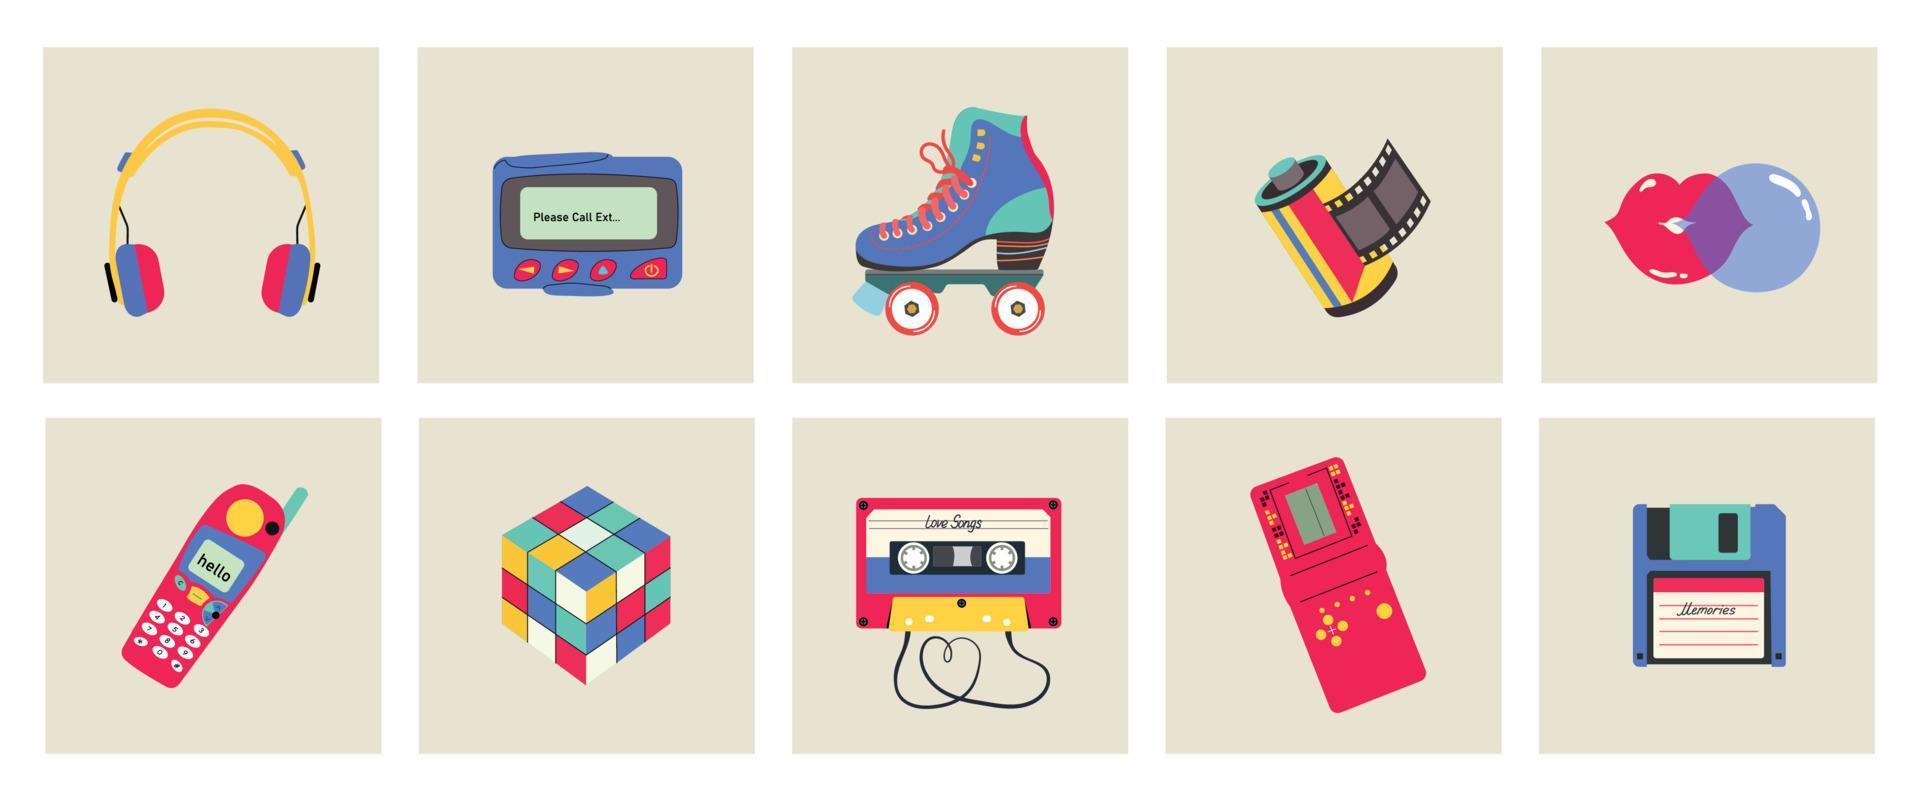 Classic 80s 90s elements in modern style, flat, line style. Hand drawn vector illustration- cube, lips, headphones, roller skates, cassette, phone, tetris, pager. Fashion patch, badge, emblem.